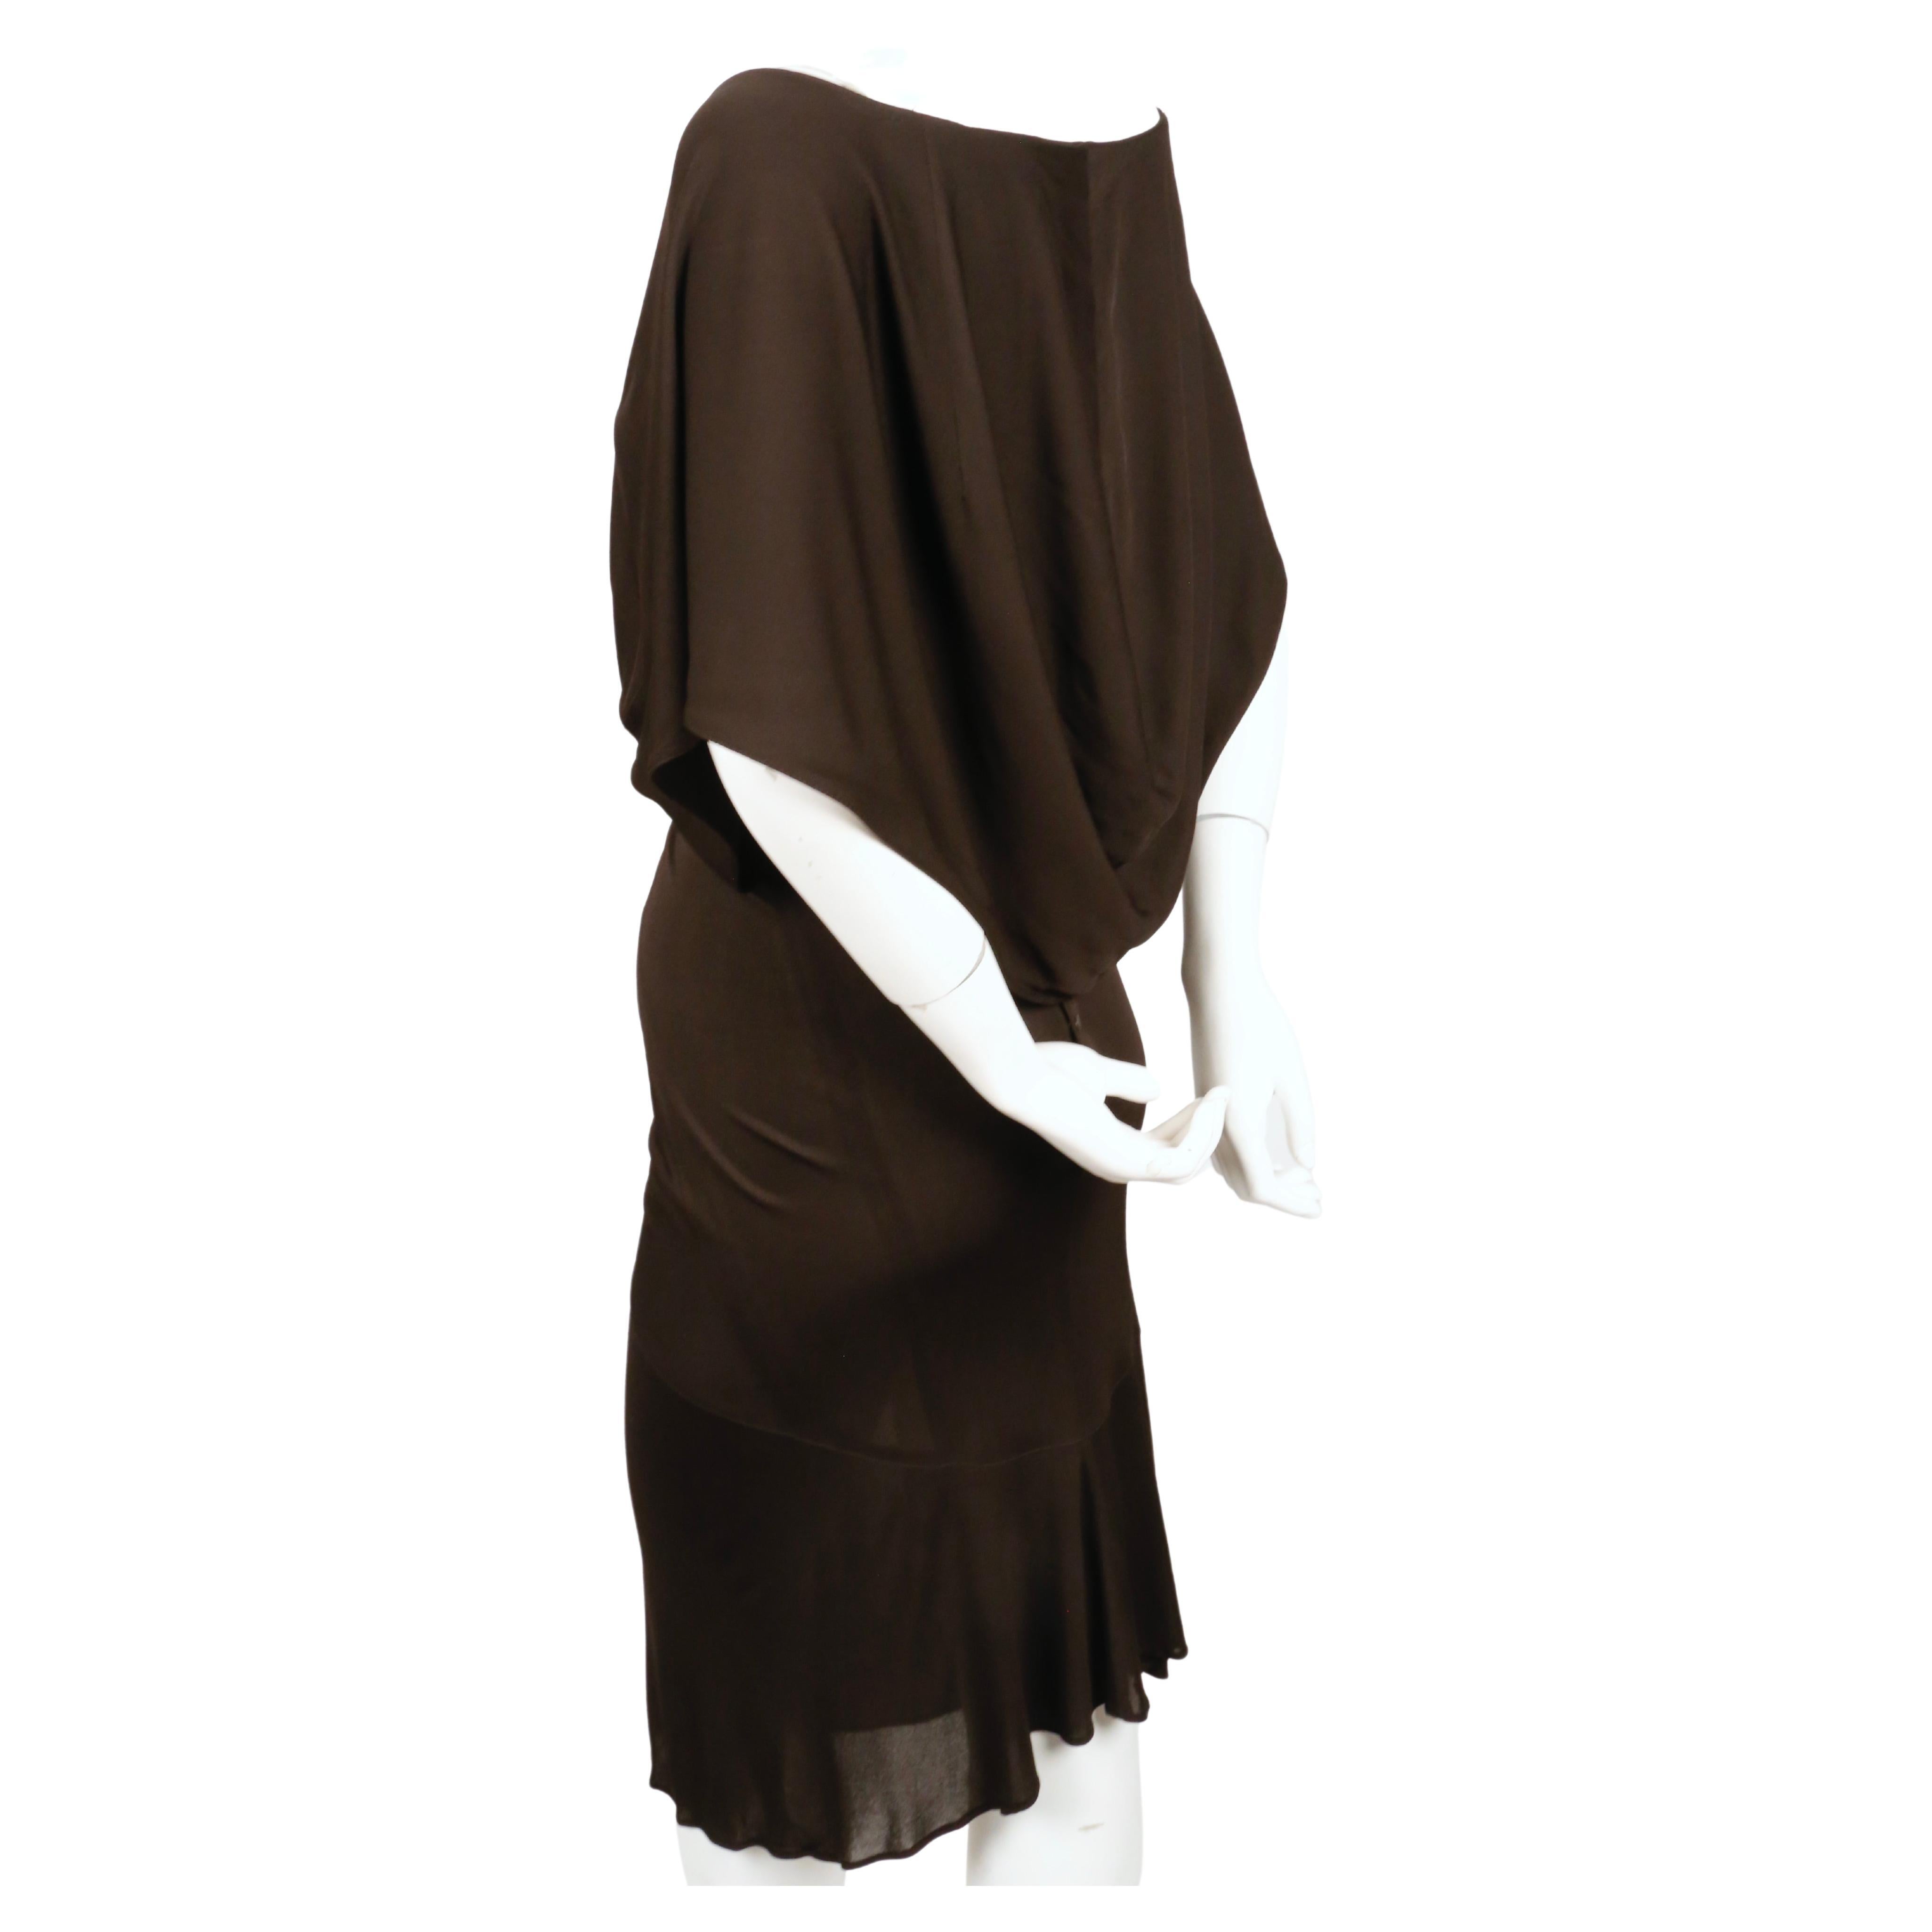 very rare 1984 AZZEDINE ALAIA iconic hooded jersey dress For Sale 4